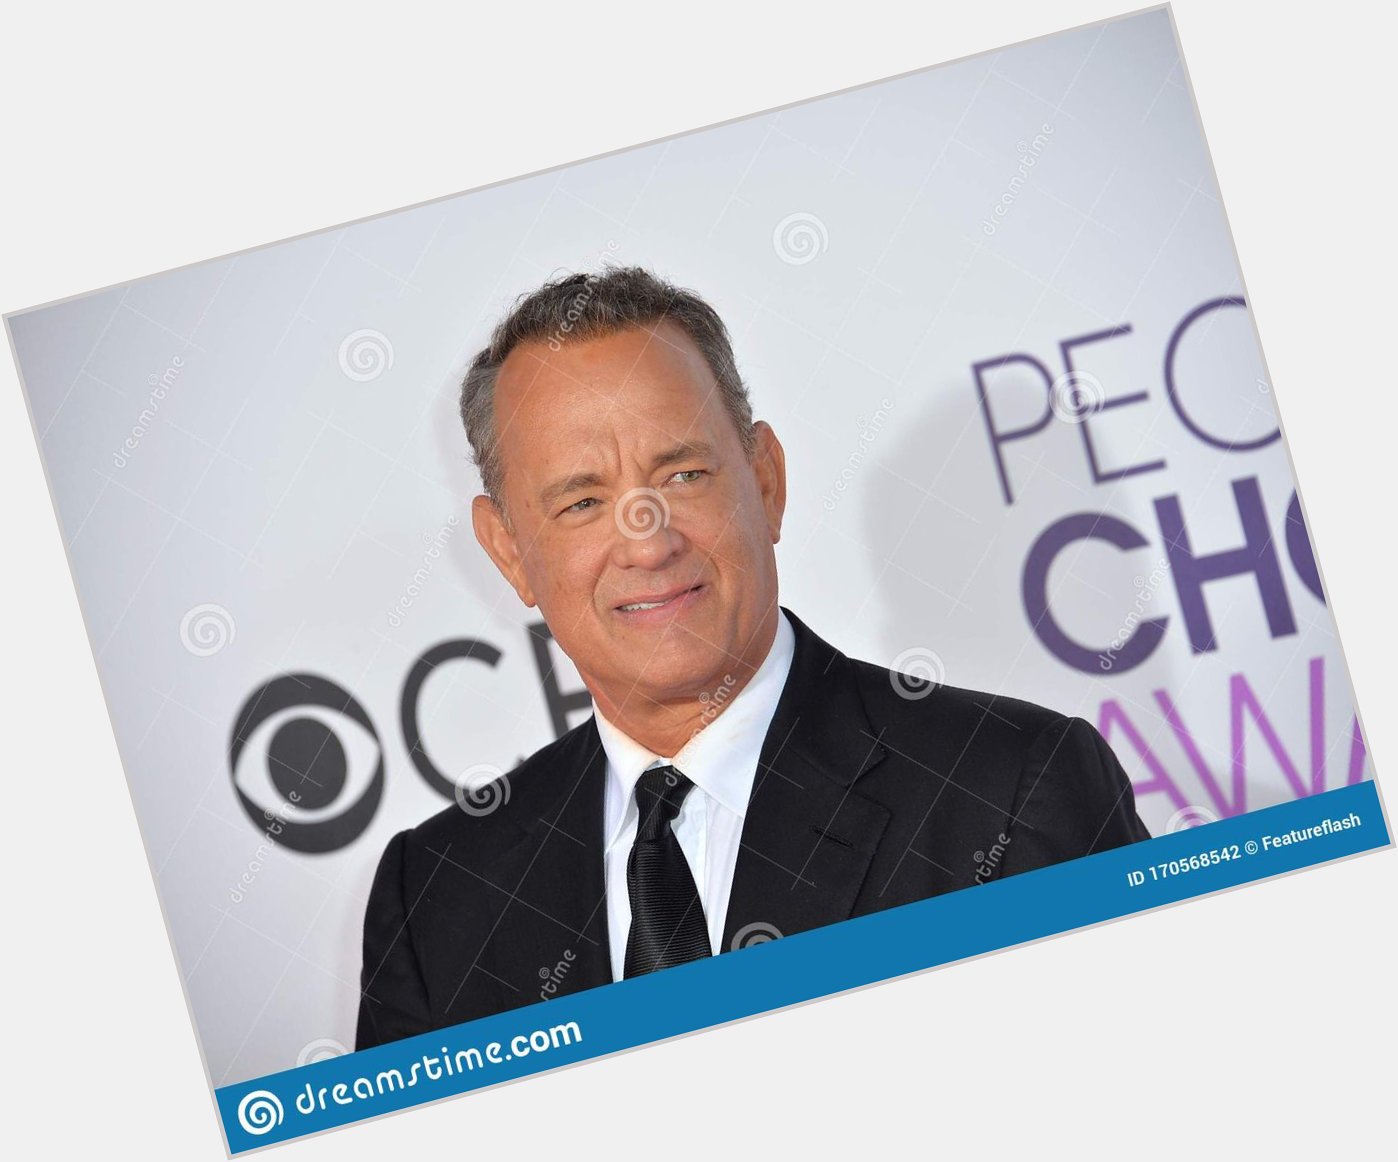 Tom Hanks birthday is on the 9 of July... every year!
Happy birthday Sir, 